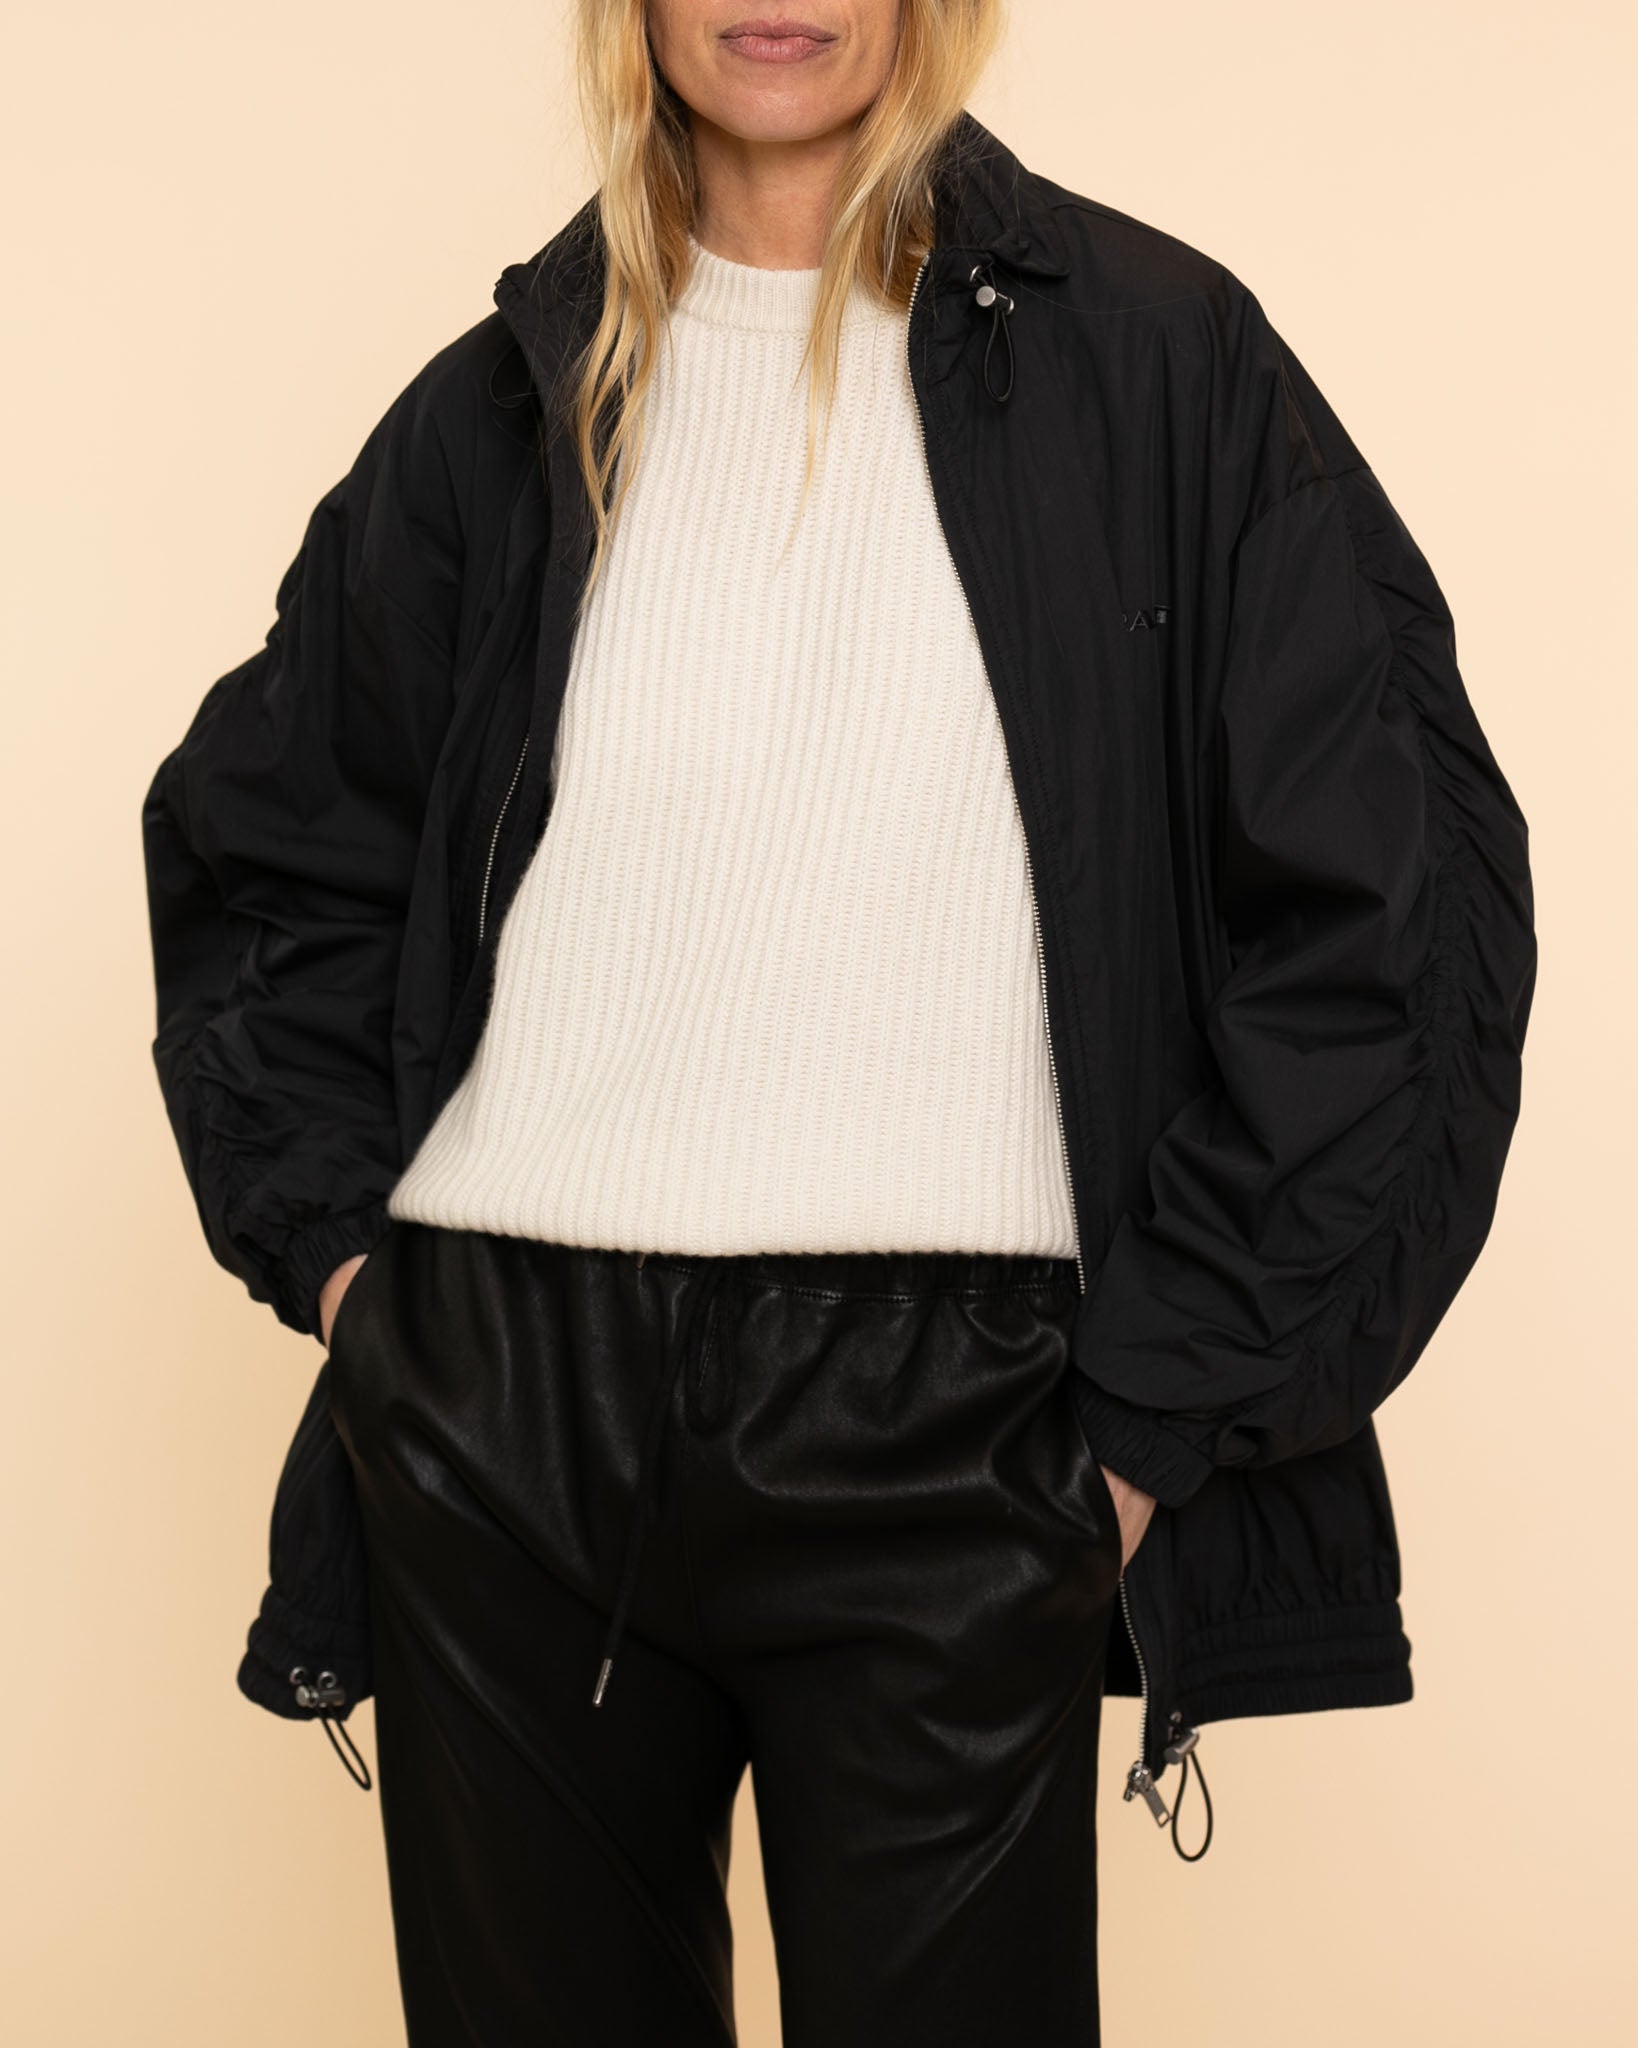 Outerwear – Wrightsmb